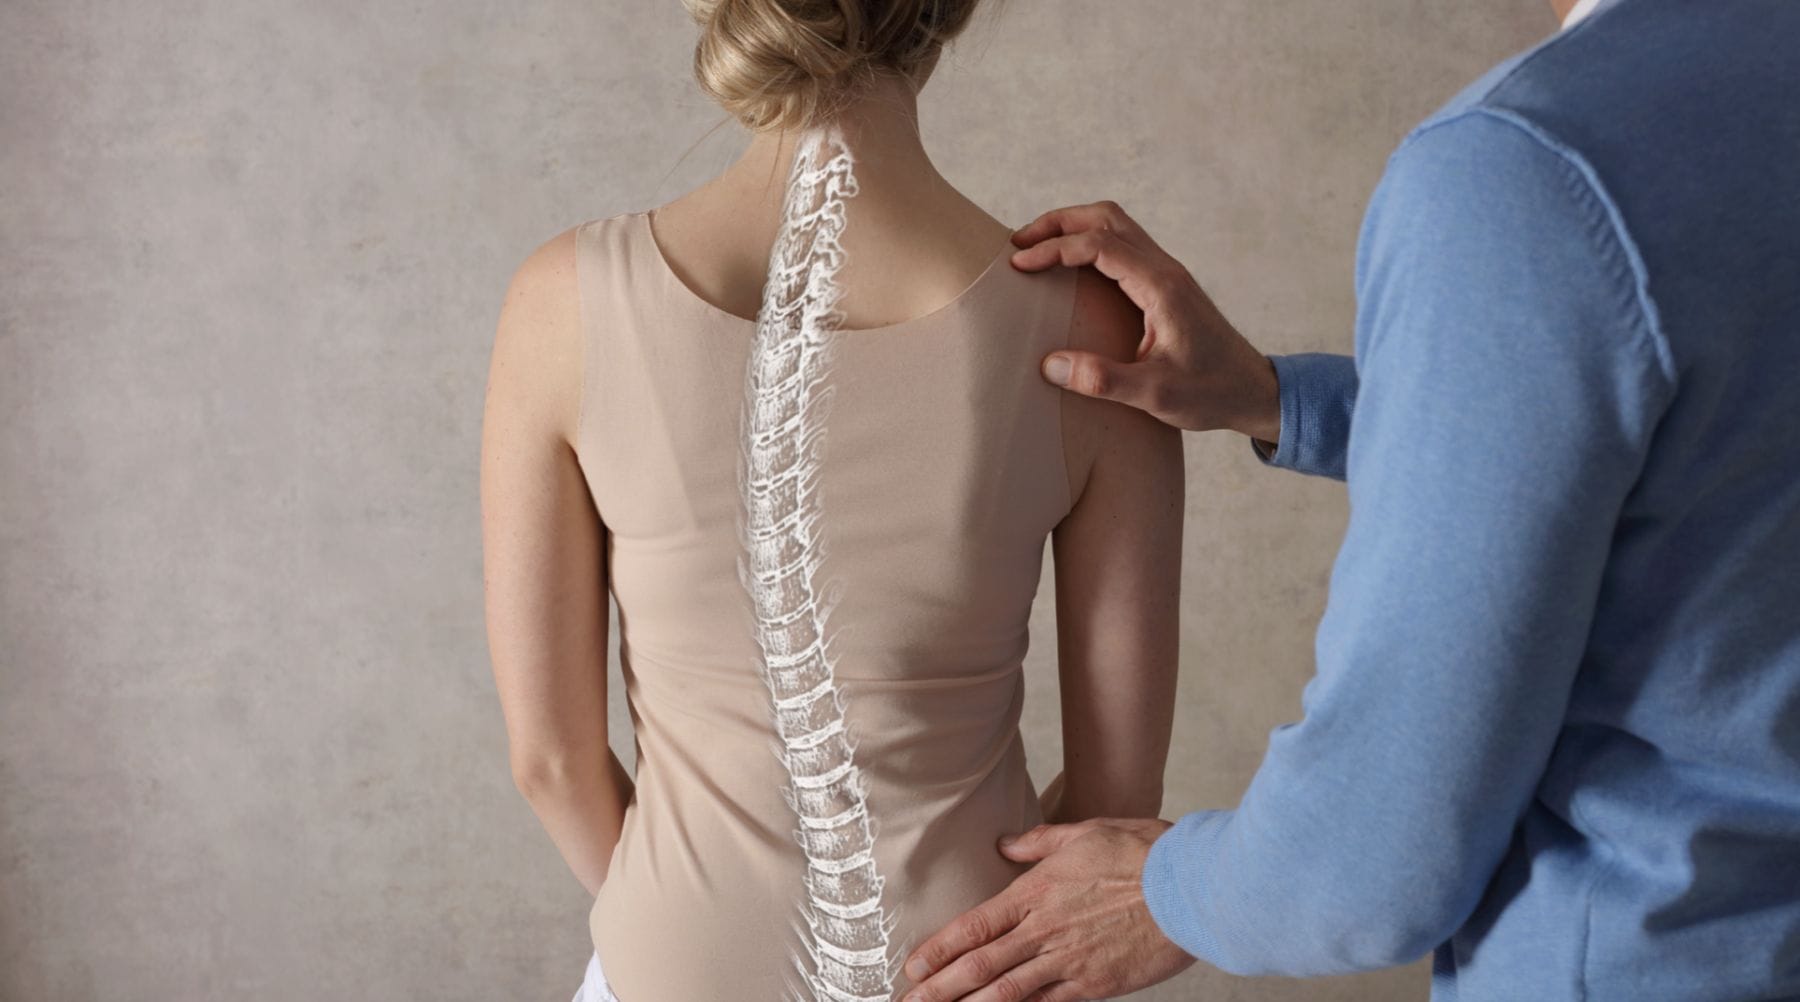 Alvica | Acupressure London | Back Pain London | Innovative Medical Device | Medical Technology Distribution and Retail | Acupressure significantly reduces chronic back pain intensity and improves functional status - Efficacy of acupressure for chronic low back pain: A systematic review, 2020